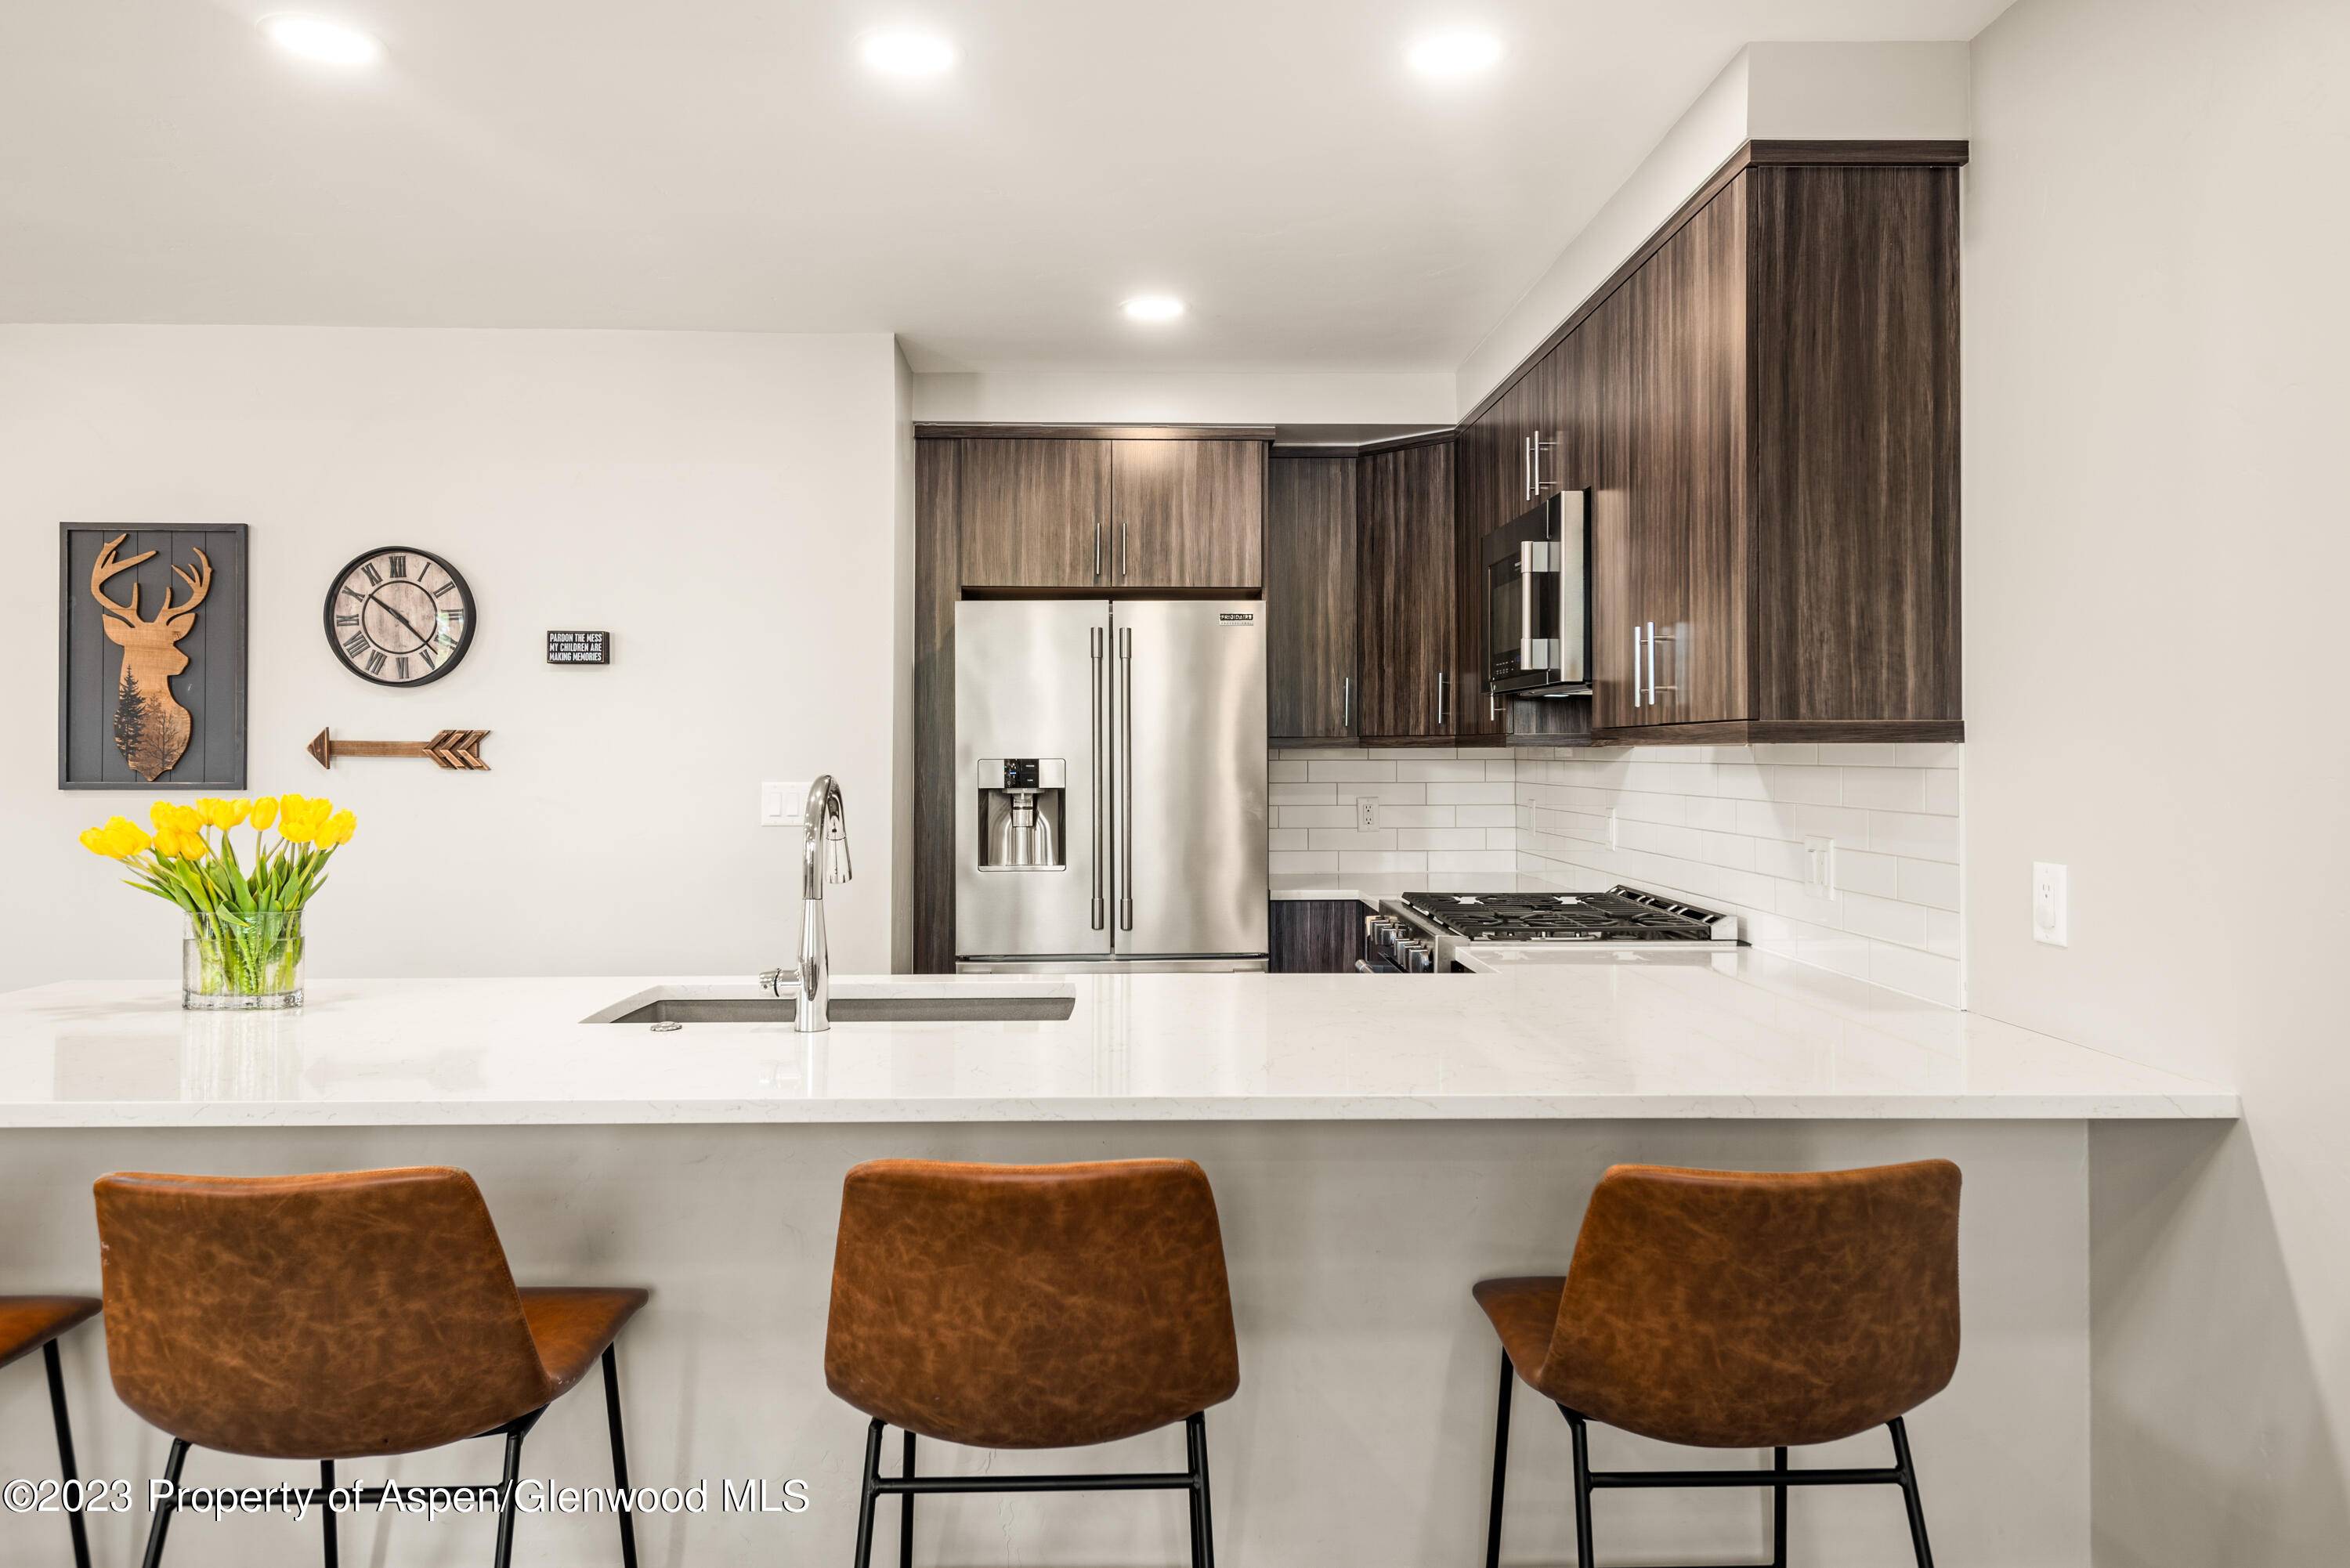 This corner townhouse in Carbondale's Thompson Park neighborhood showcases artful mountain contemporary design.